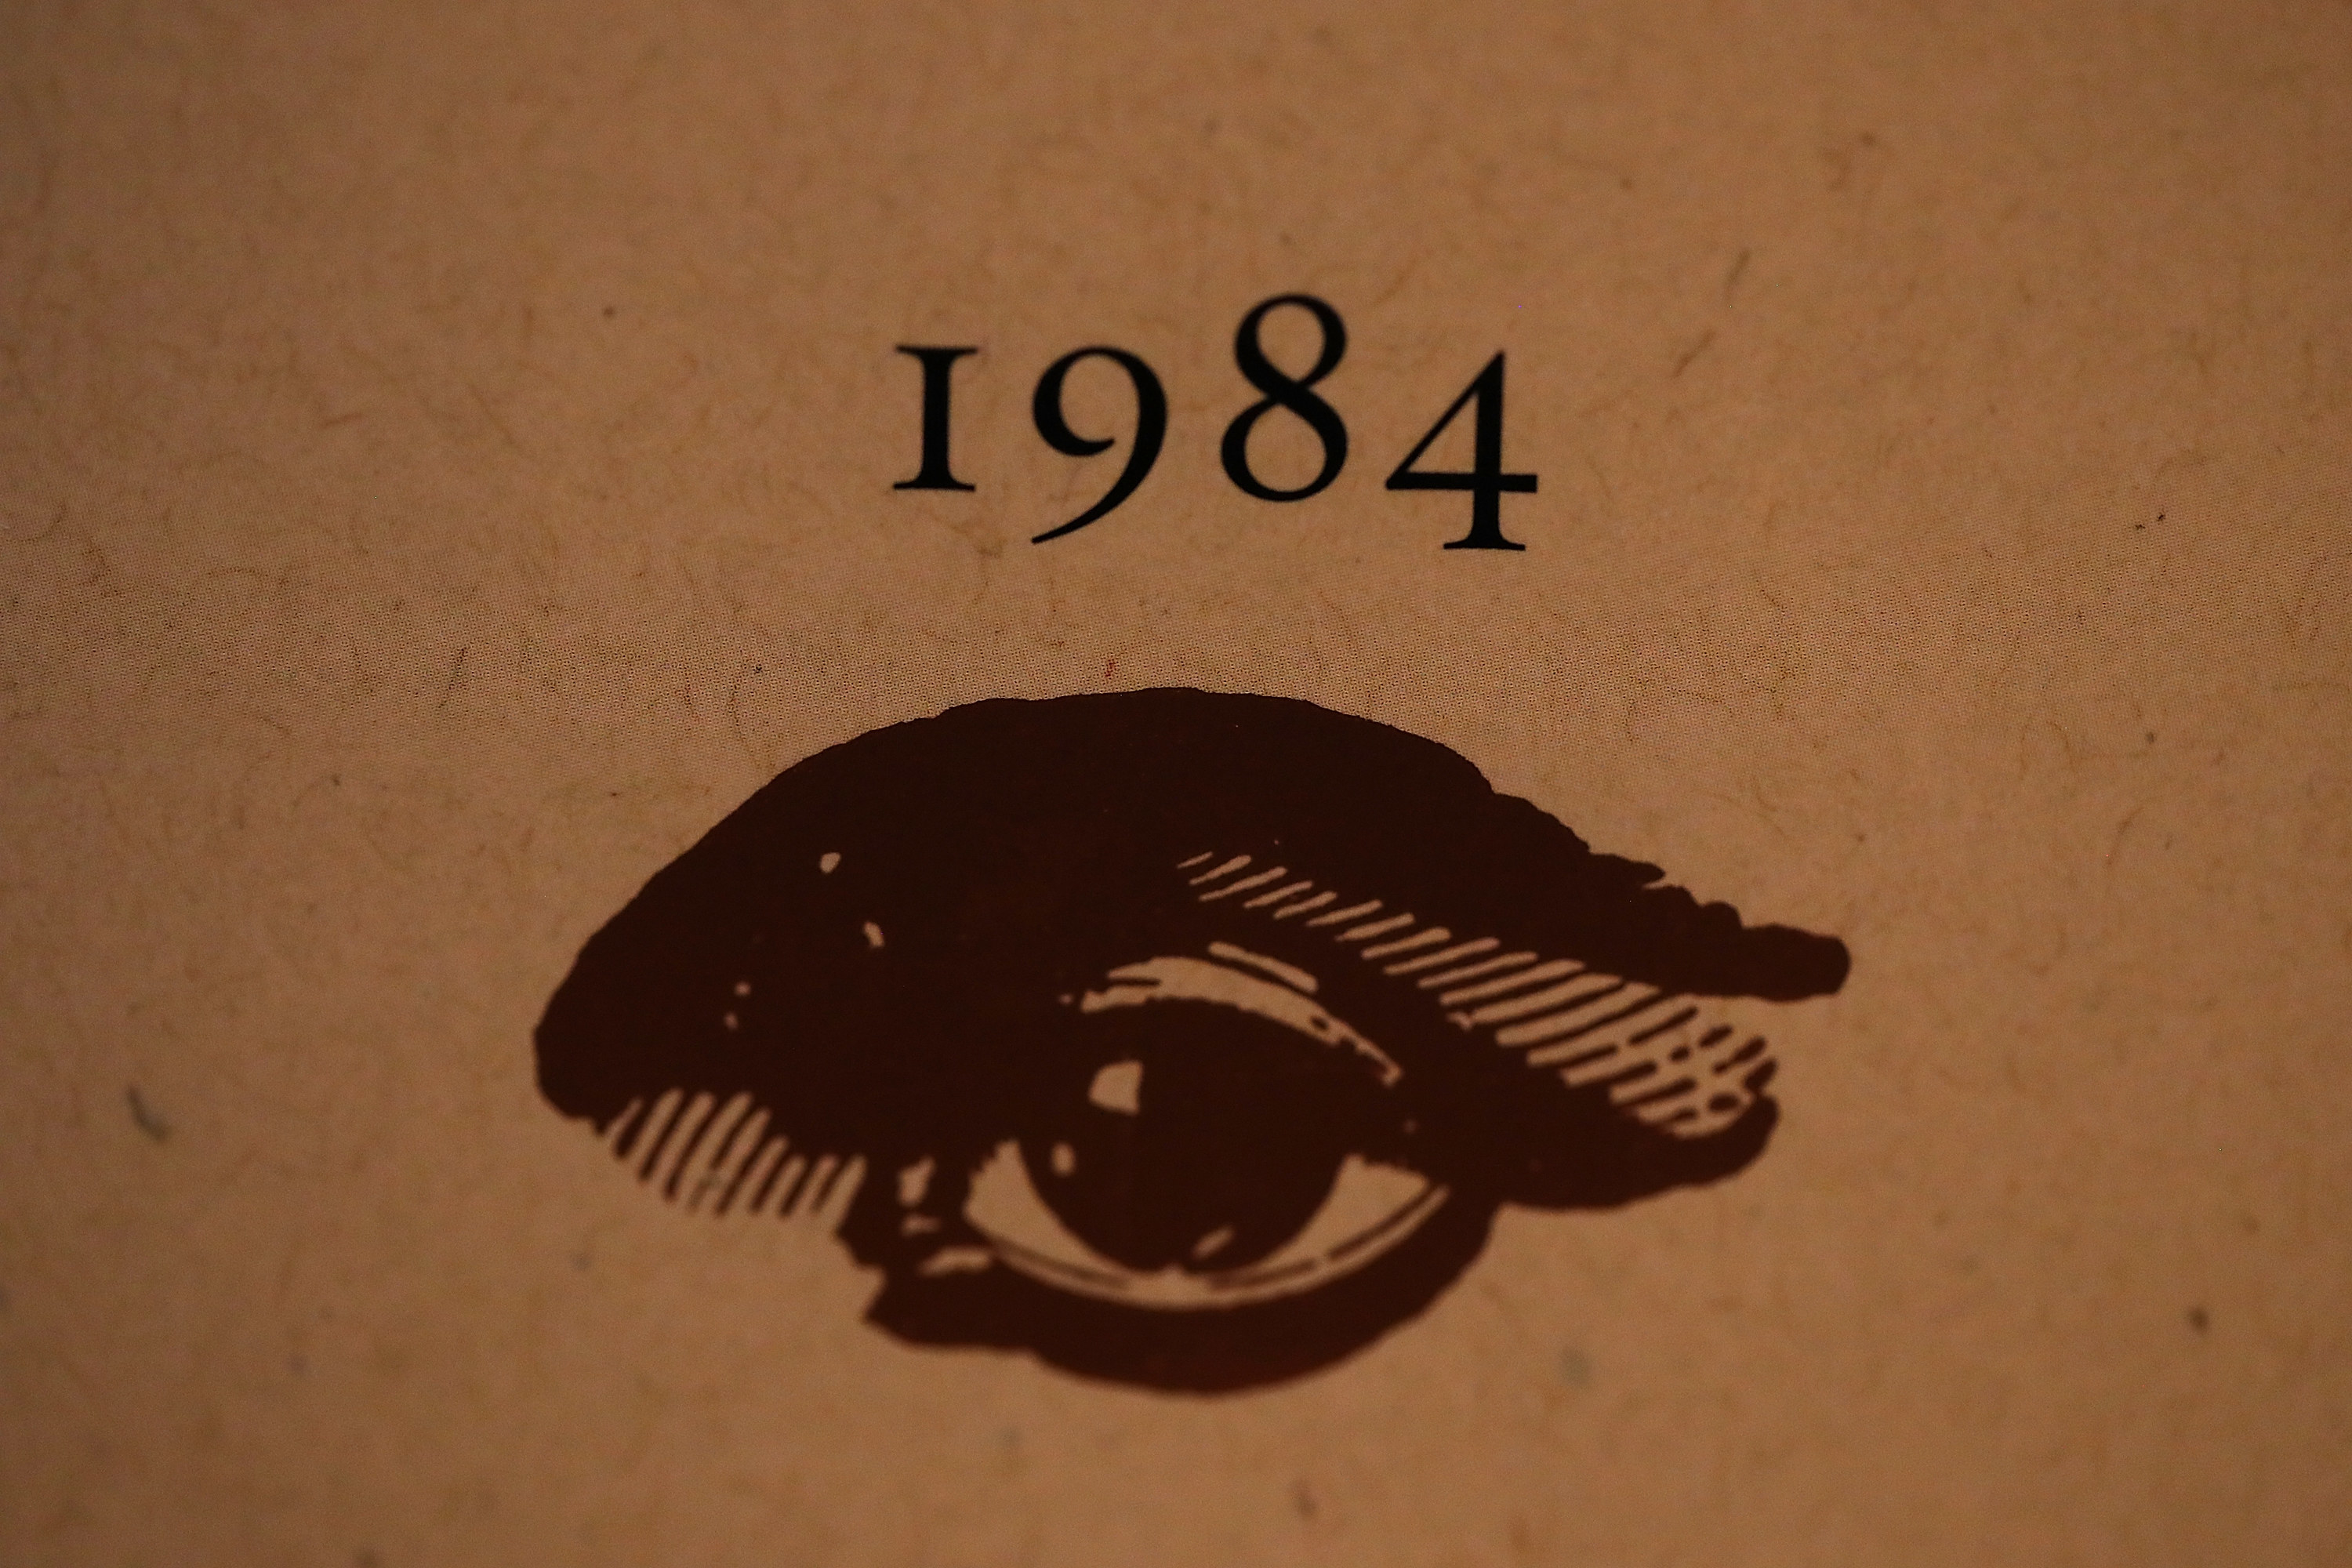 A close-up of a page featuring &#x27;1984&#x27; and a drawing of an eye